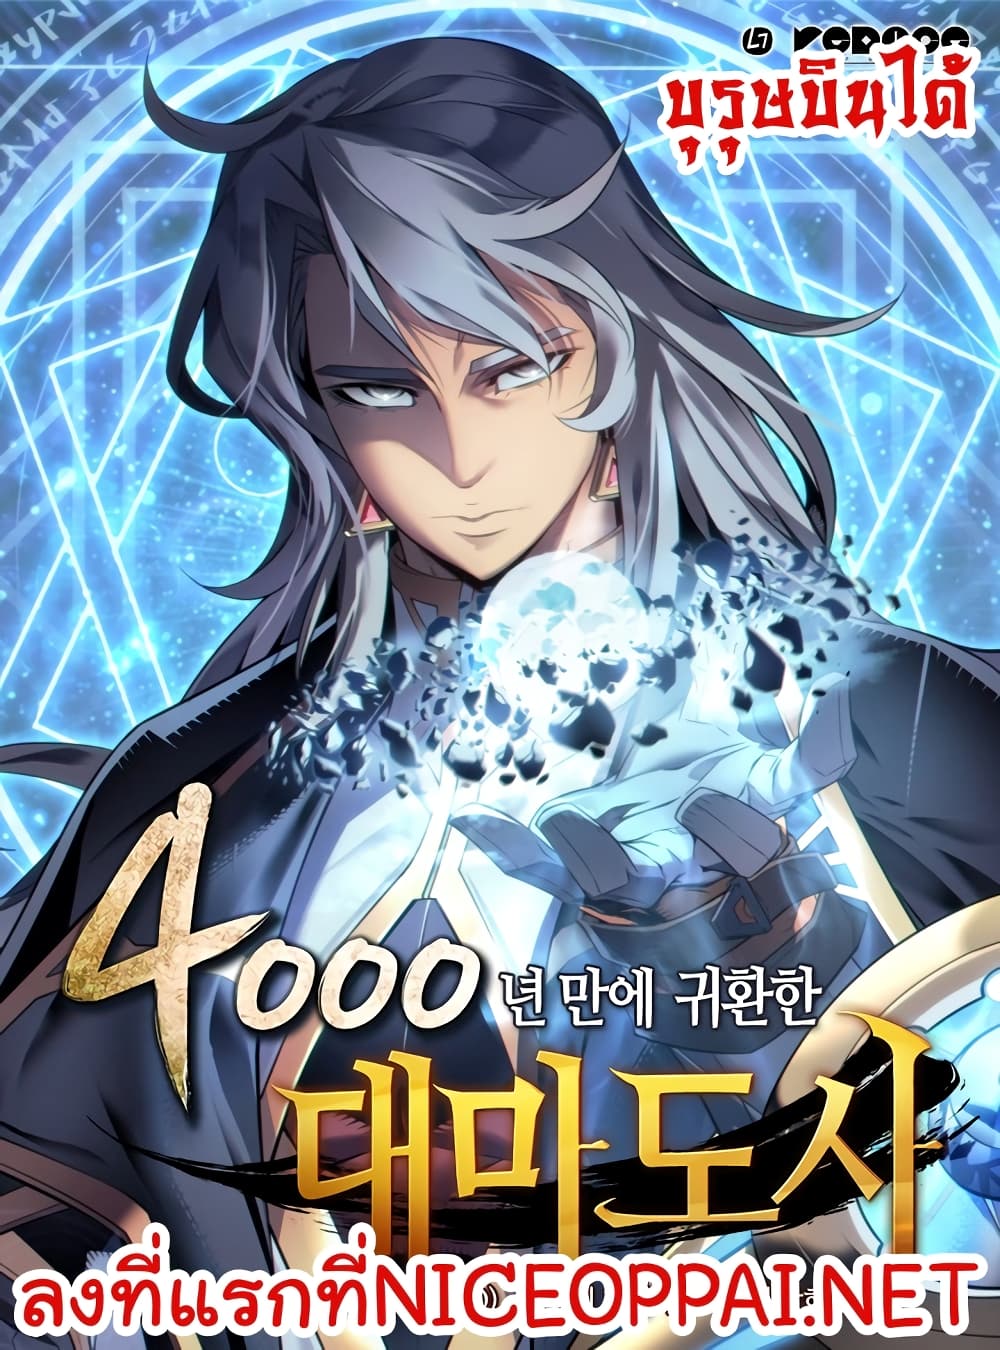 The Great Mage Returns After 4000 Years 47 (1)